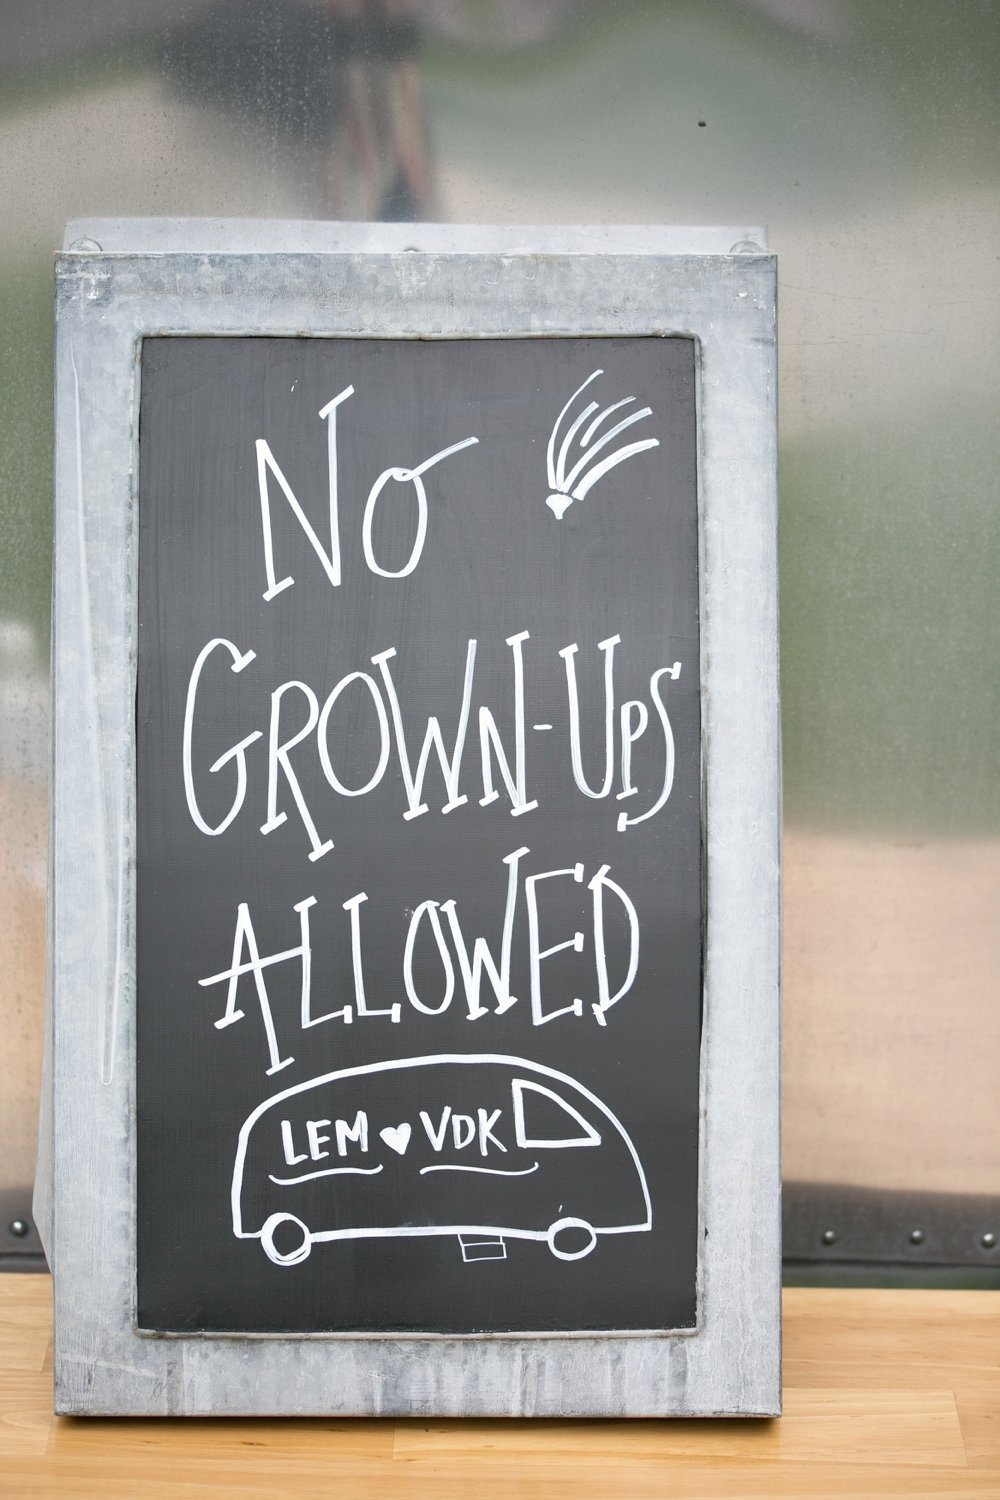 No grownups allowed chalkboard sign at wedding. Great for a kids play area!